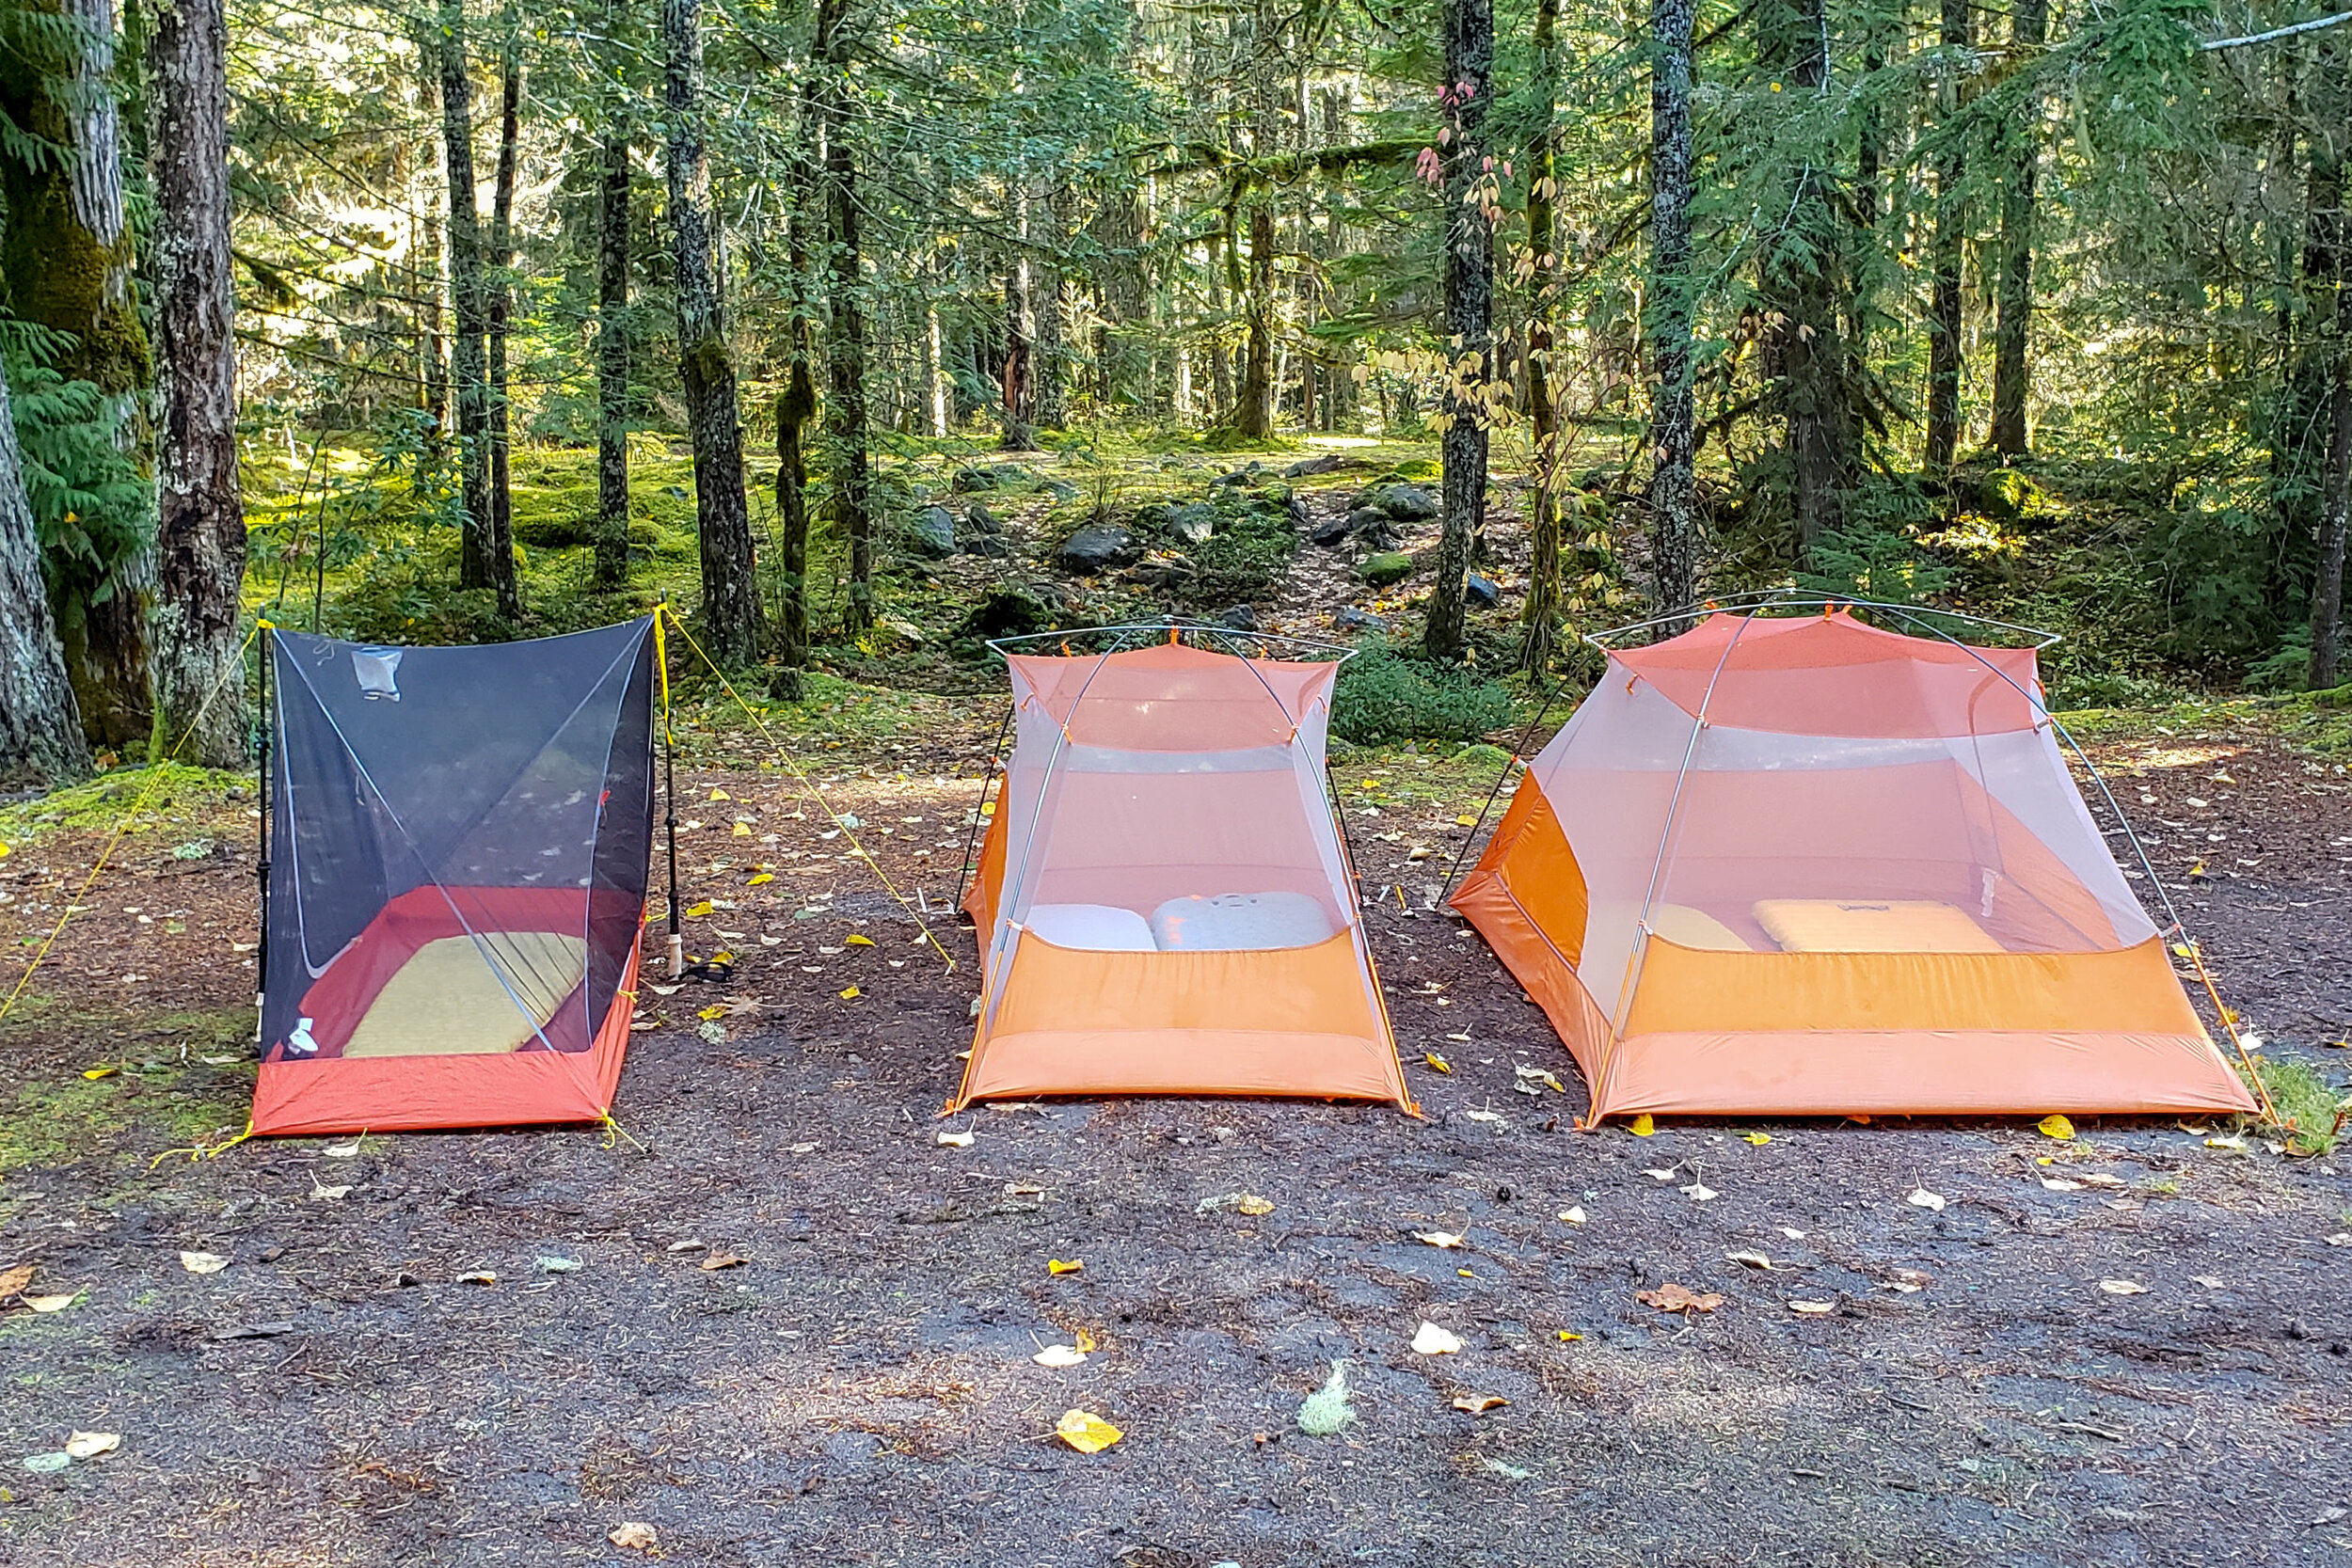 comparison between sizes of a 1-person (sierra designs fl 1), 2-person (Copper Spur HV UL 2), and 3-person tent (Copper spur hv ul 3).